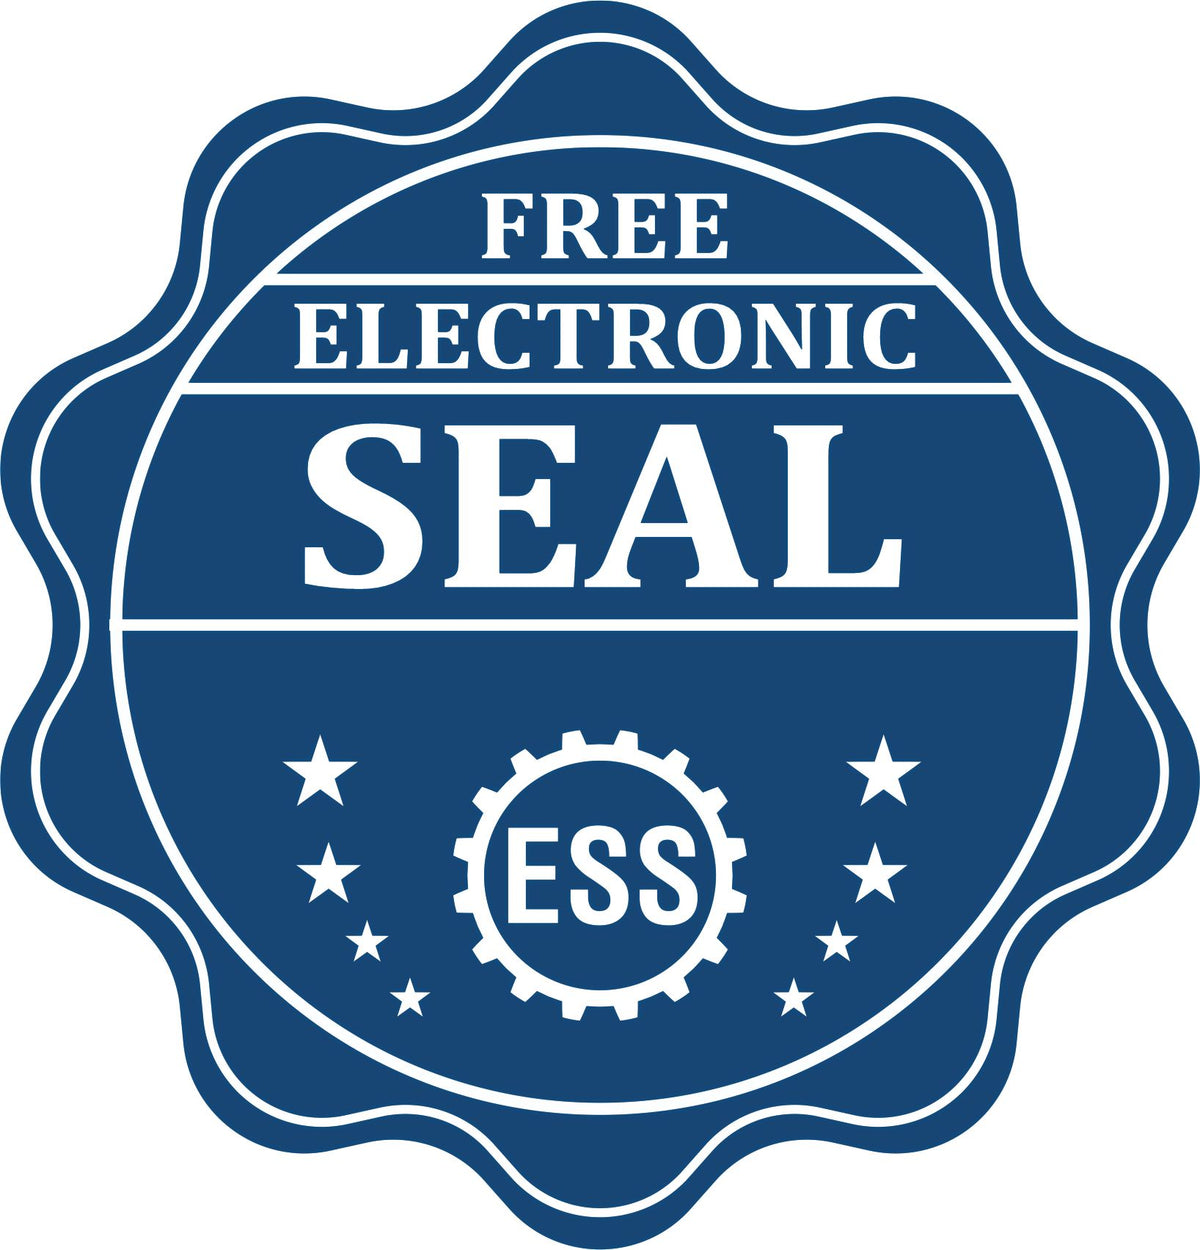 A badge showing a free electronic seal for the Heavy-Duty Indiana Rectangular Notary Stamp with stars and the ESS gear on the emblem.